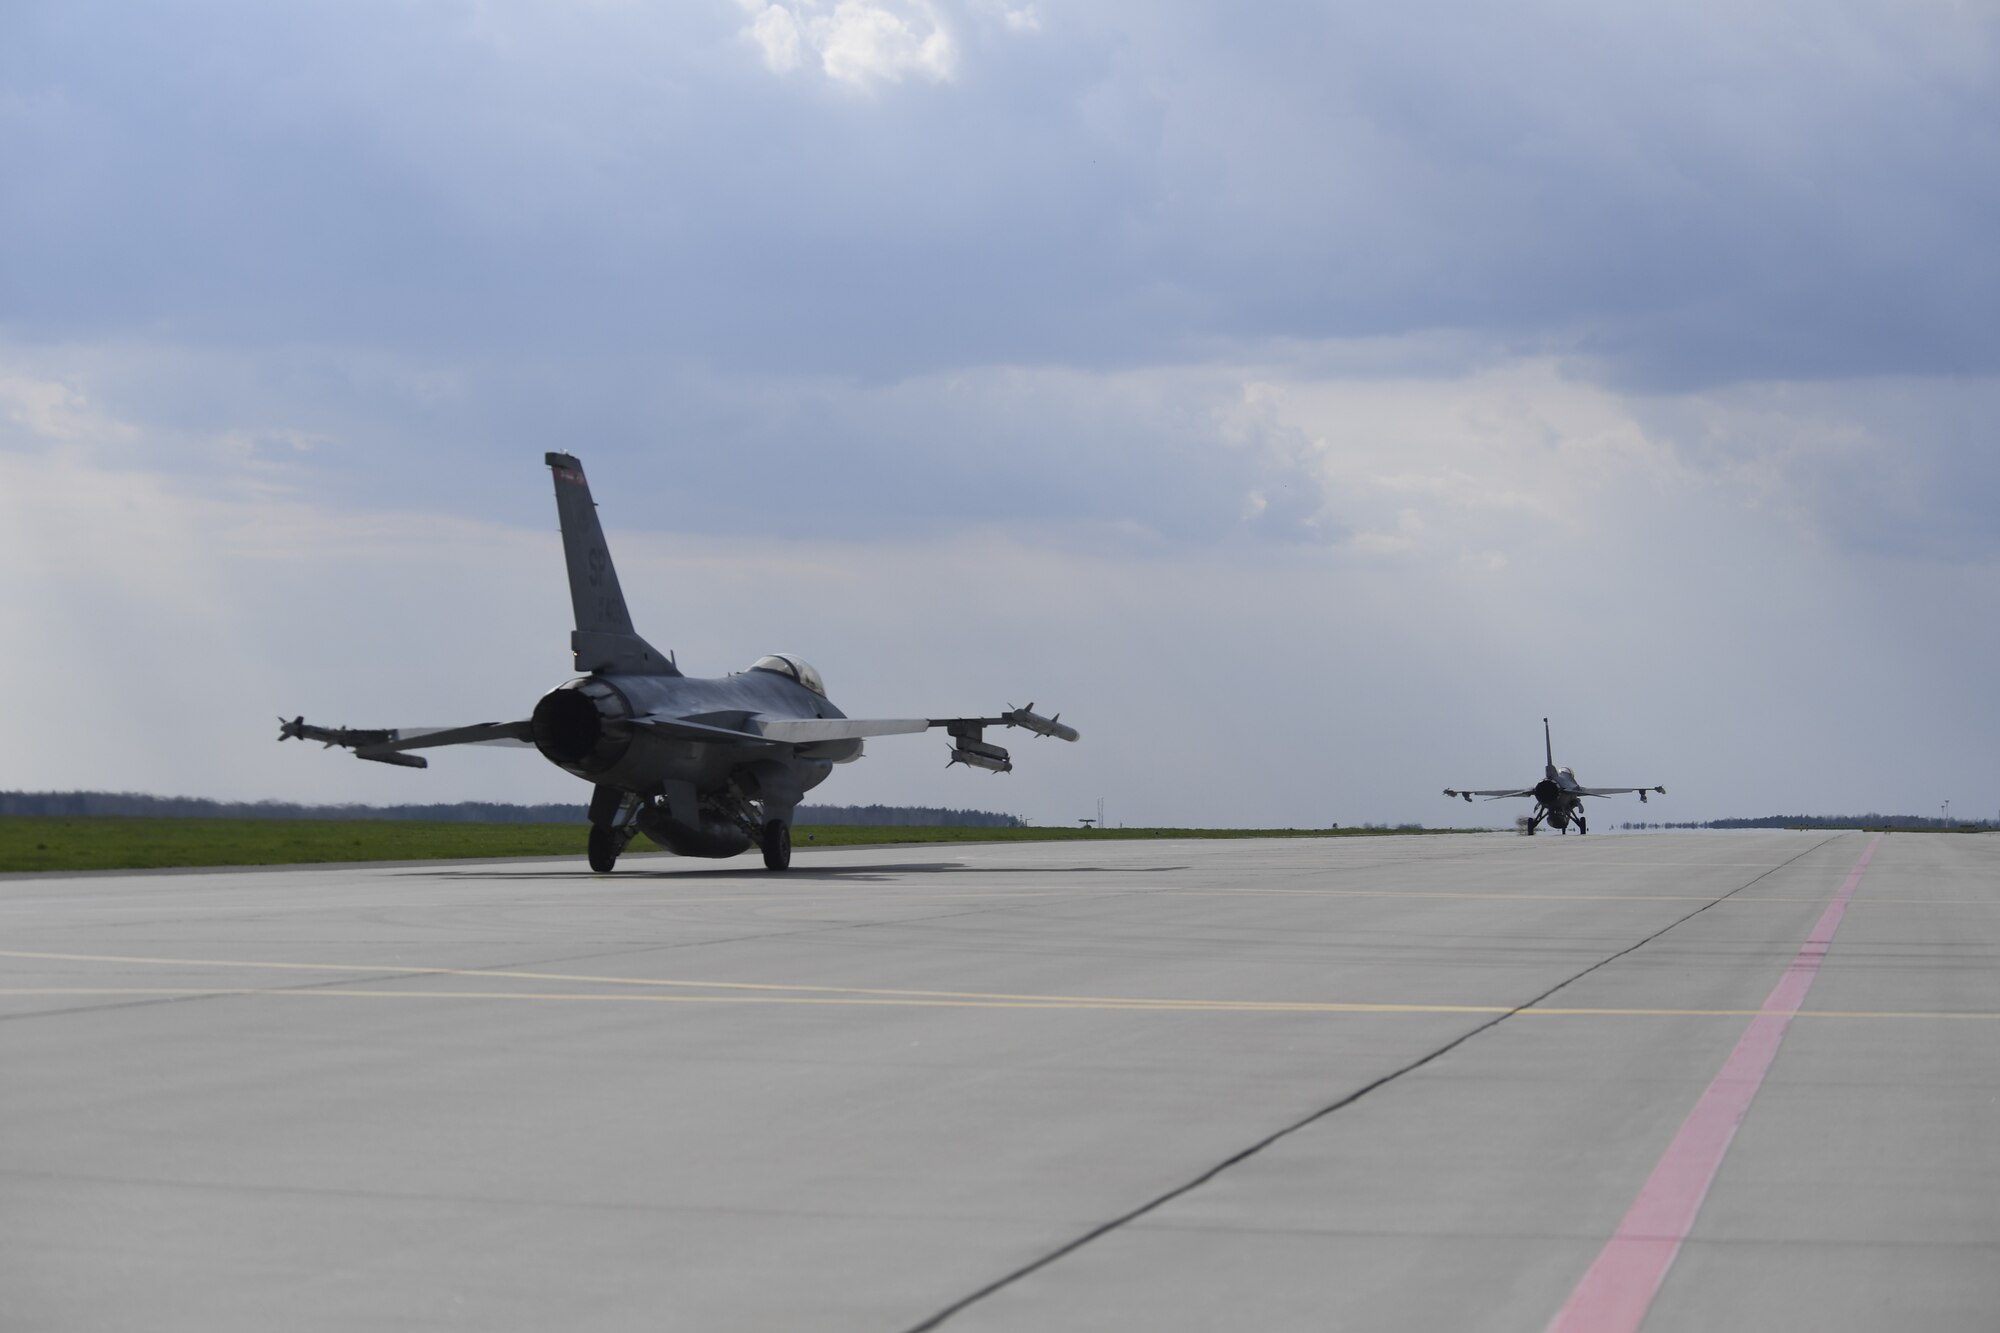 Two U.S. Air Force F-16 Fighting Falcon aircraft from the 480th Fighter Squadron prepare to take off during an Agile Combat Employment exercise at Łask Air Base, Poland, April 20, 2021.